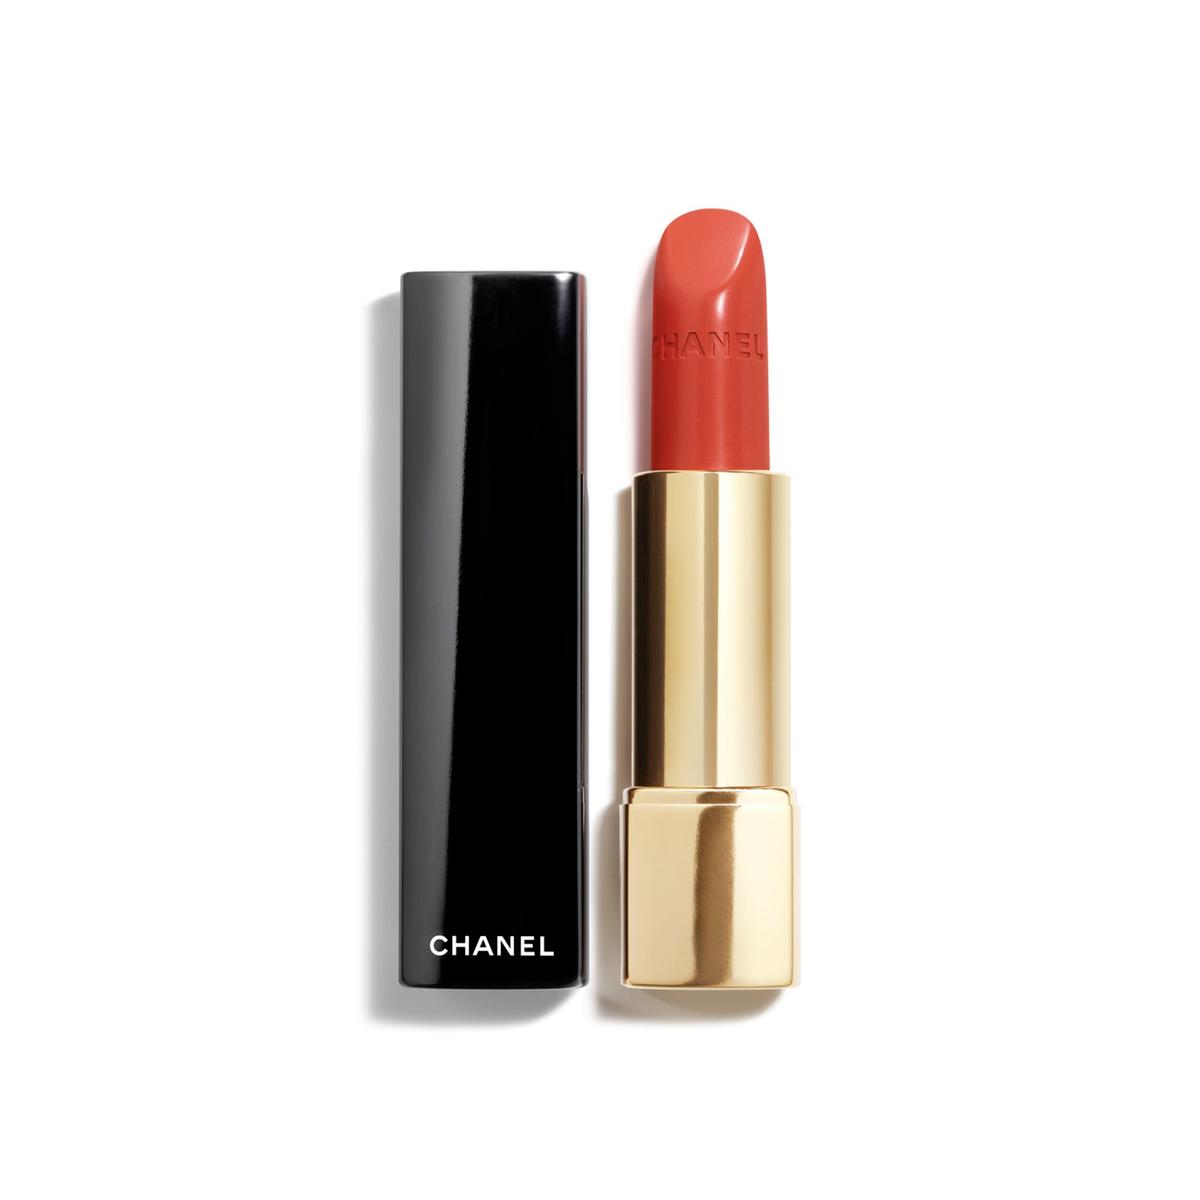 CHANEL ROUGE ALLURE  - 1